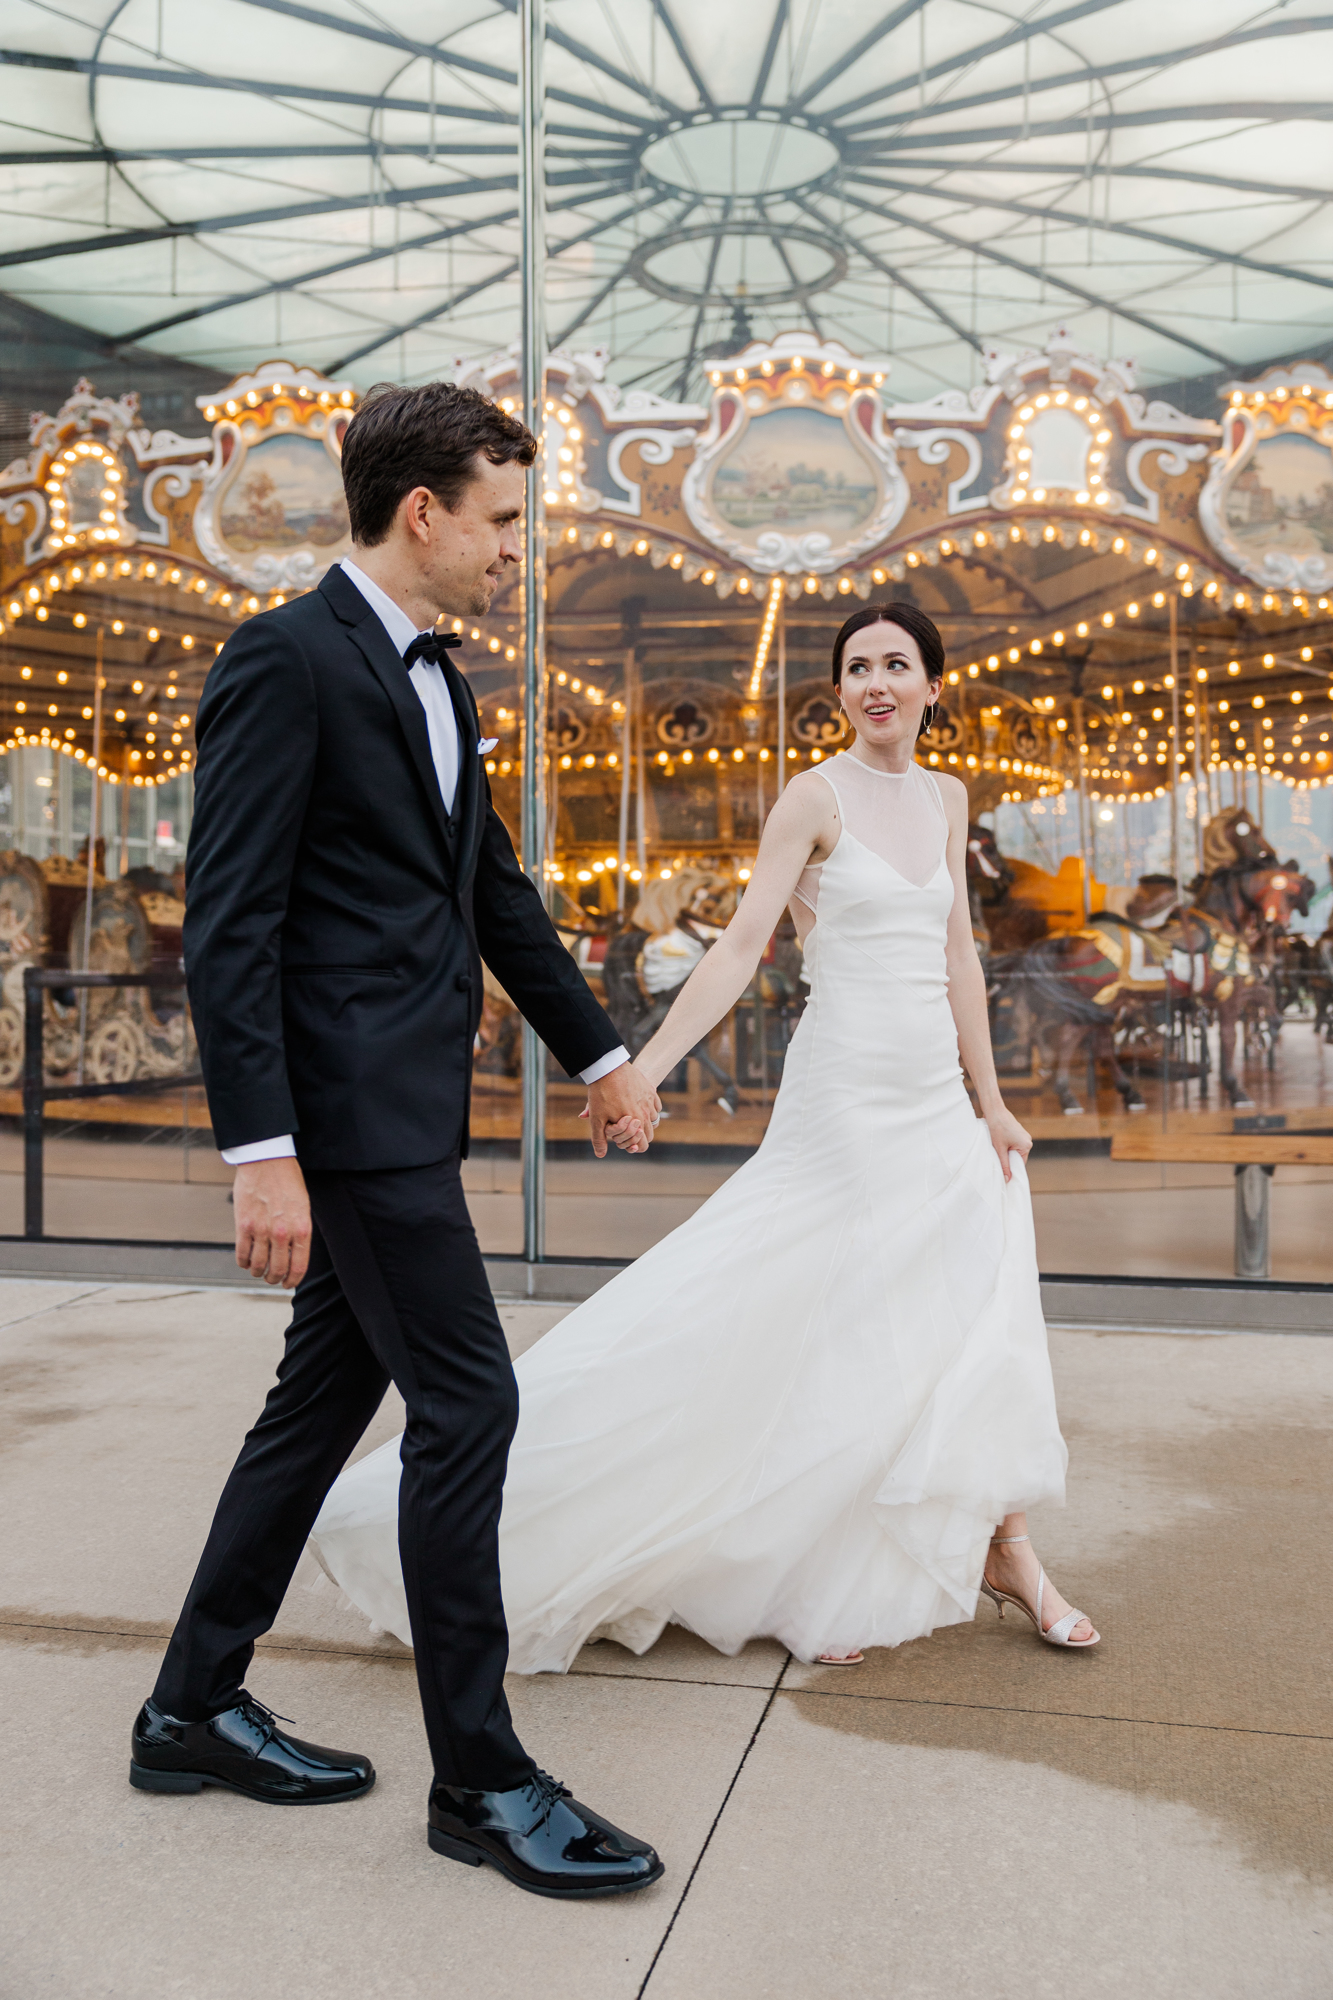 Eye-catching DUMBO, Brooklyn Wedding Photos at Smack Mellon and Jane's Carousel